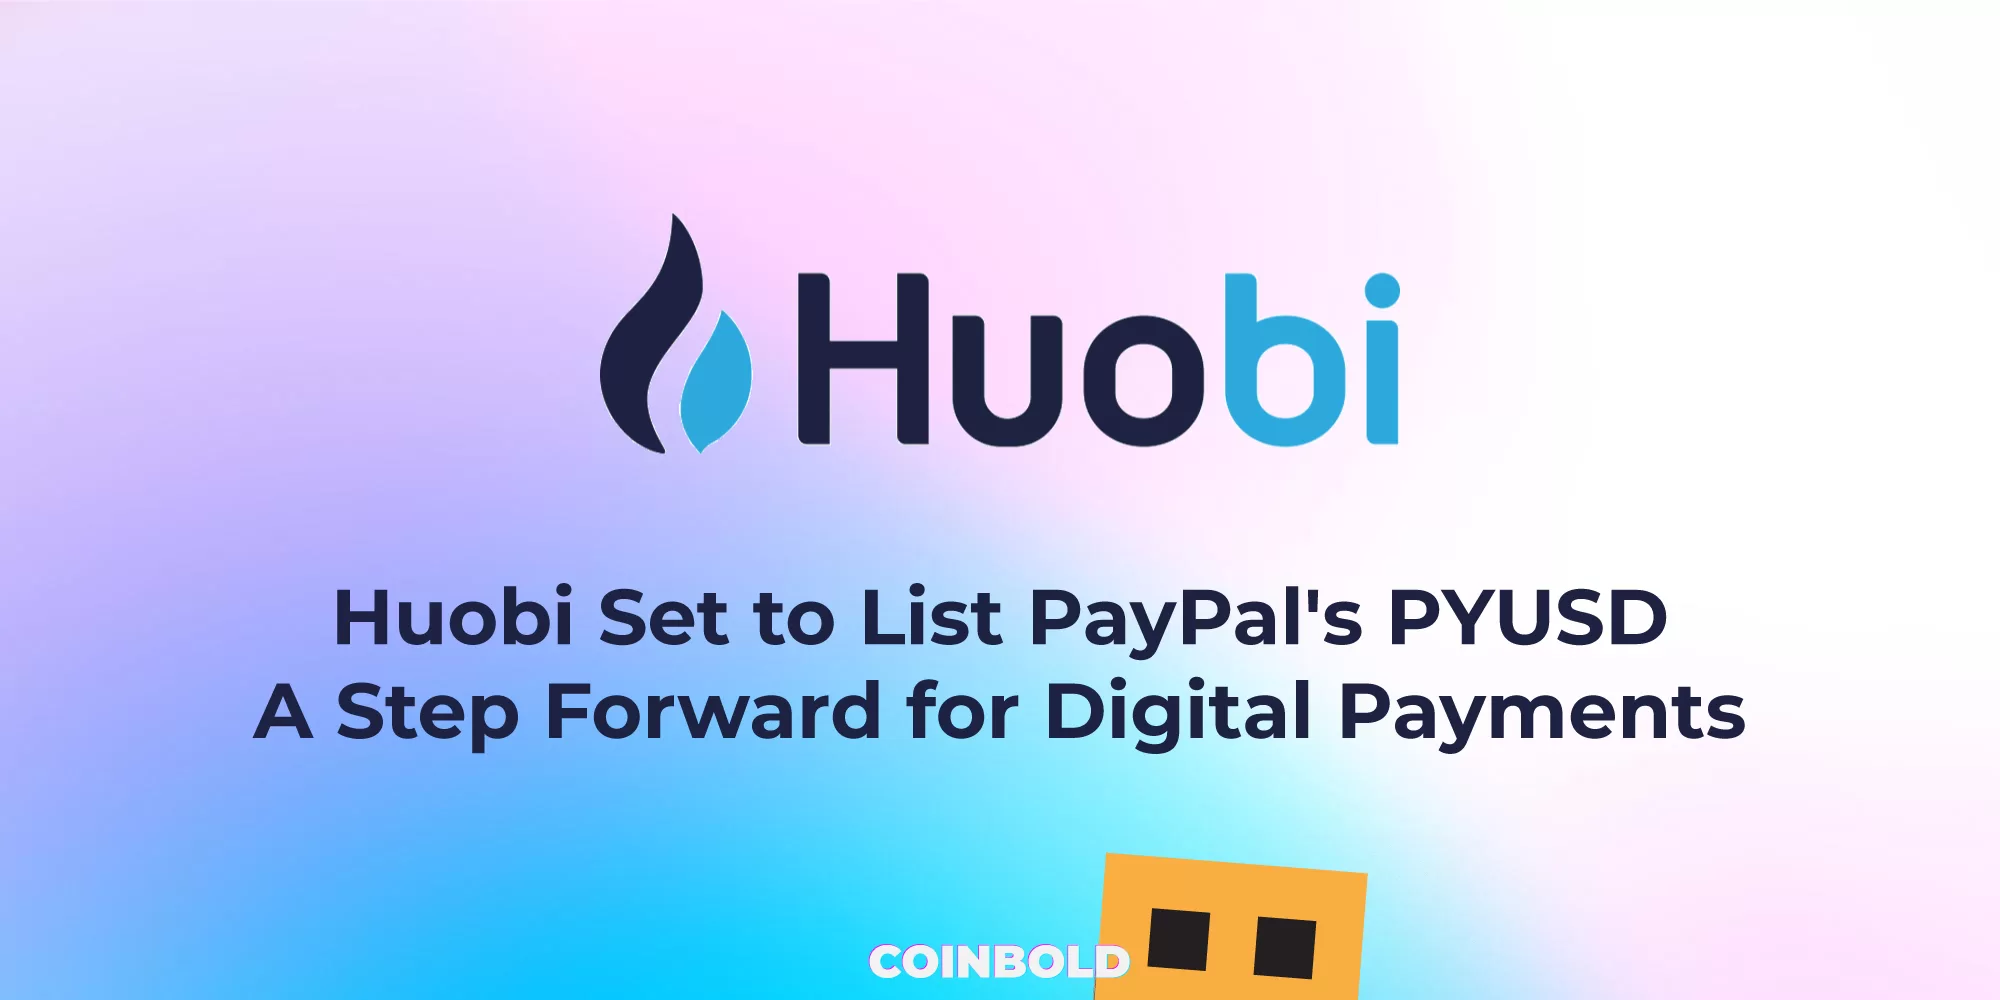 Huobi Set to List PayPal's PYUSD A Step Forward for Digital Payments